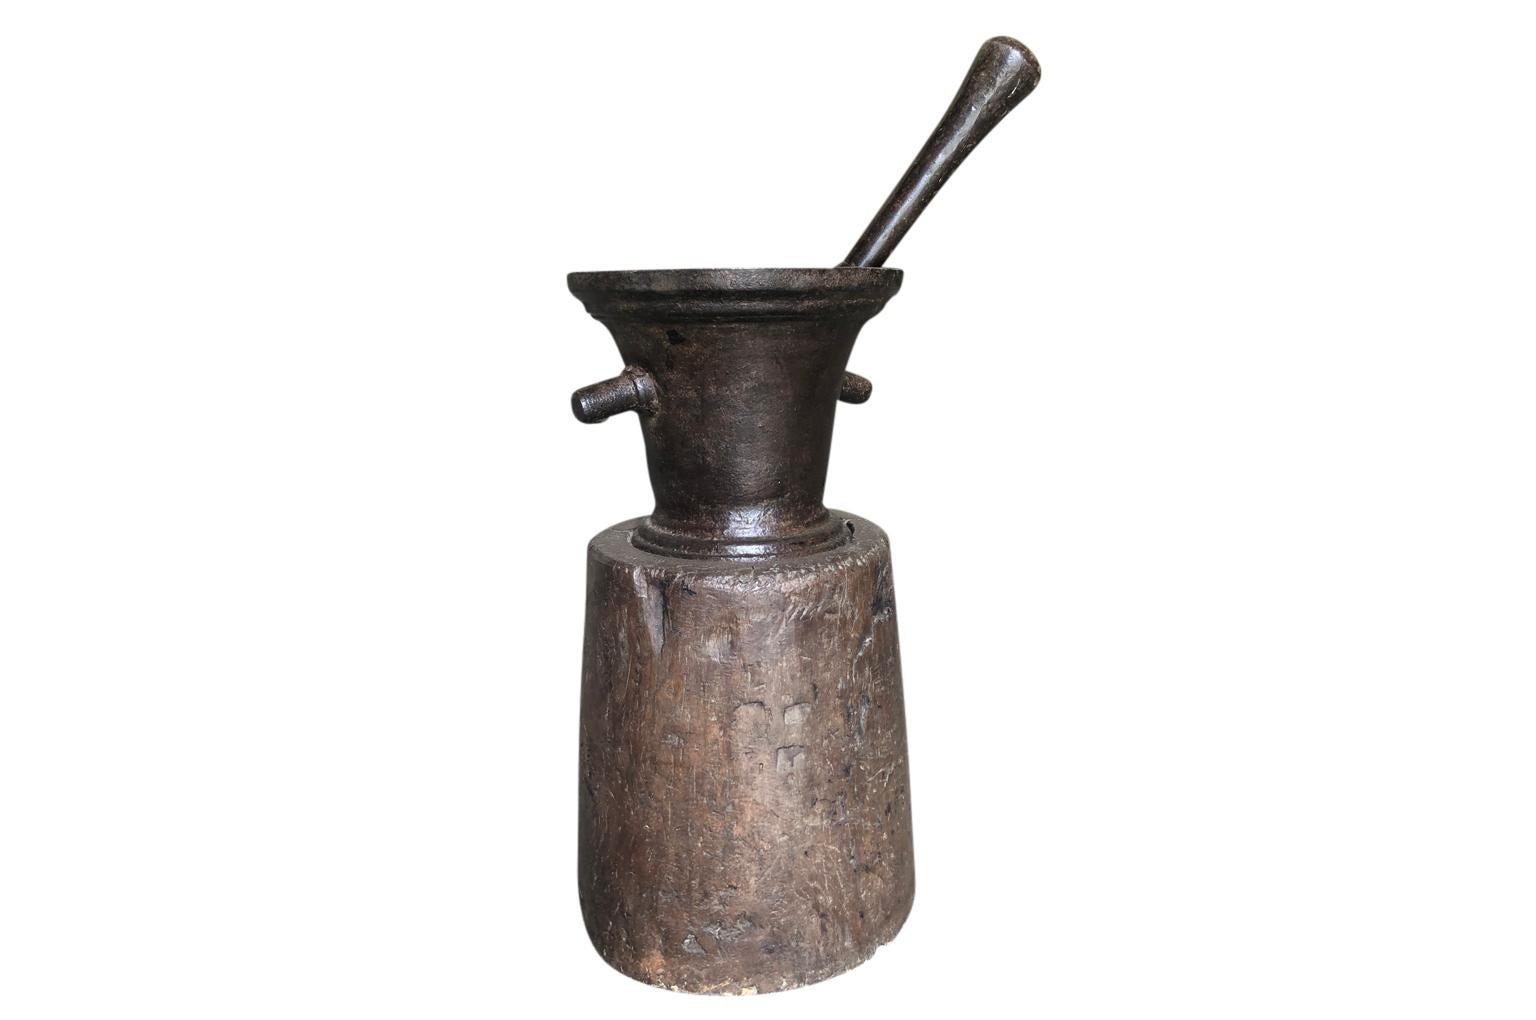 A sensational 18th century mortar and pestle in iron with its base constructed from a solid block of walnut. A stunning sculpture for any traditional or modern surrounding.